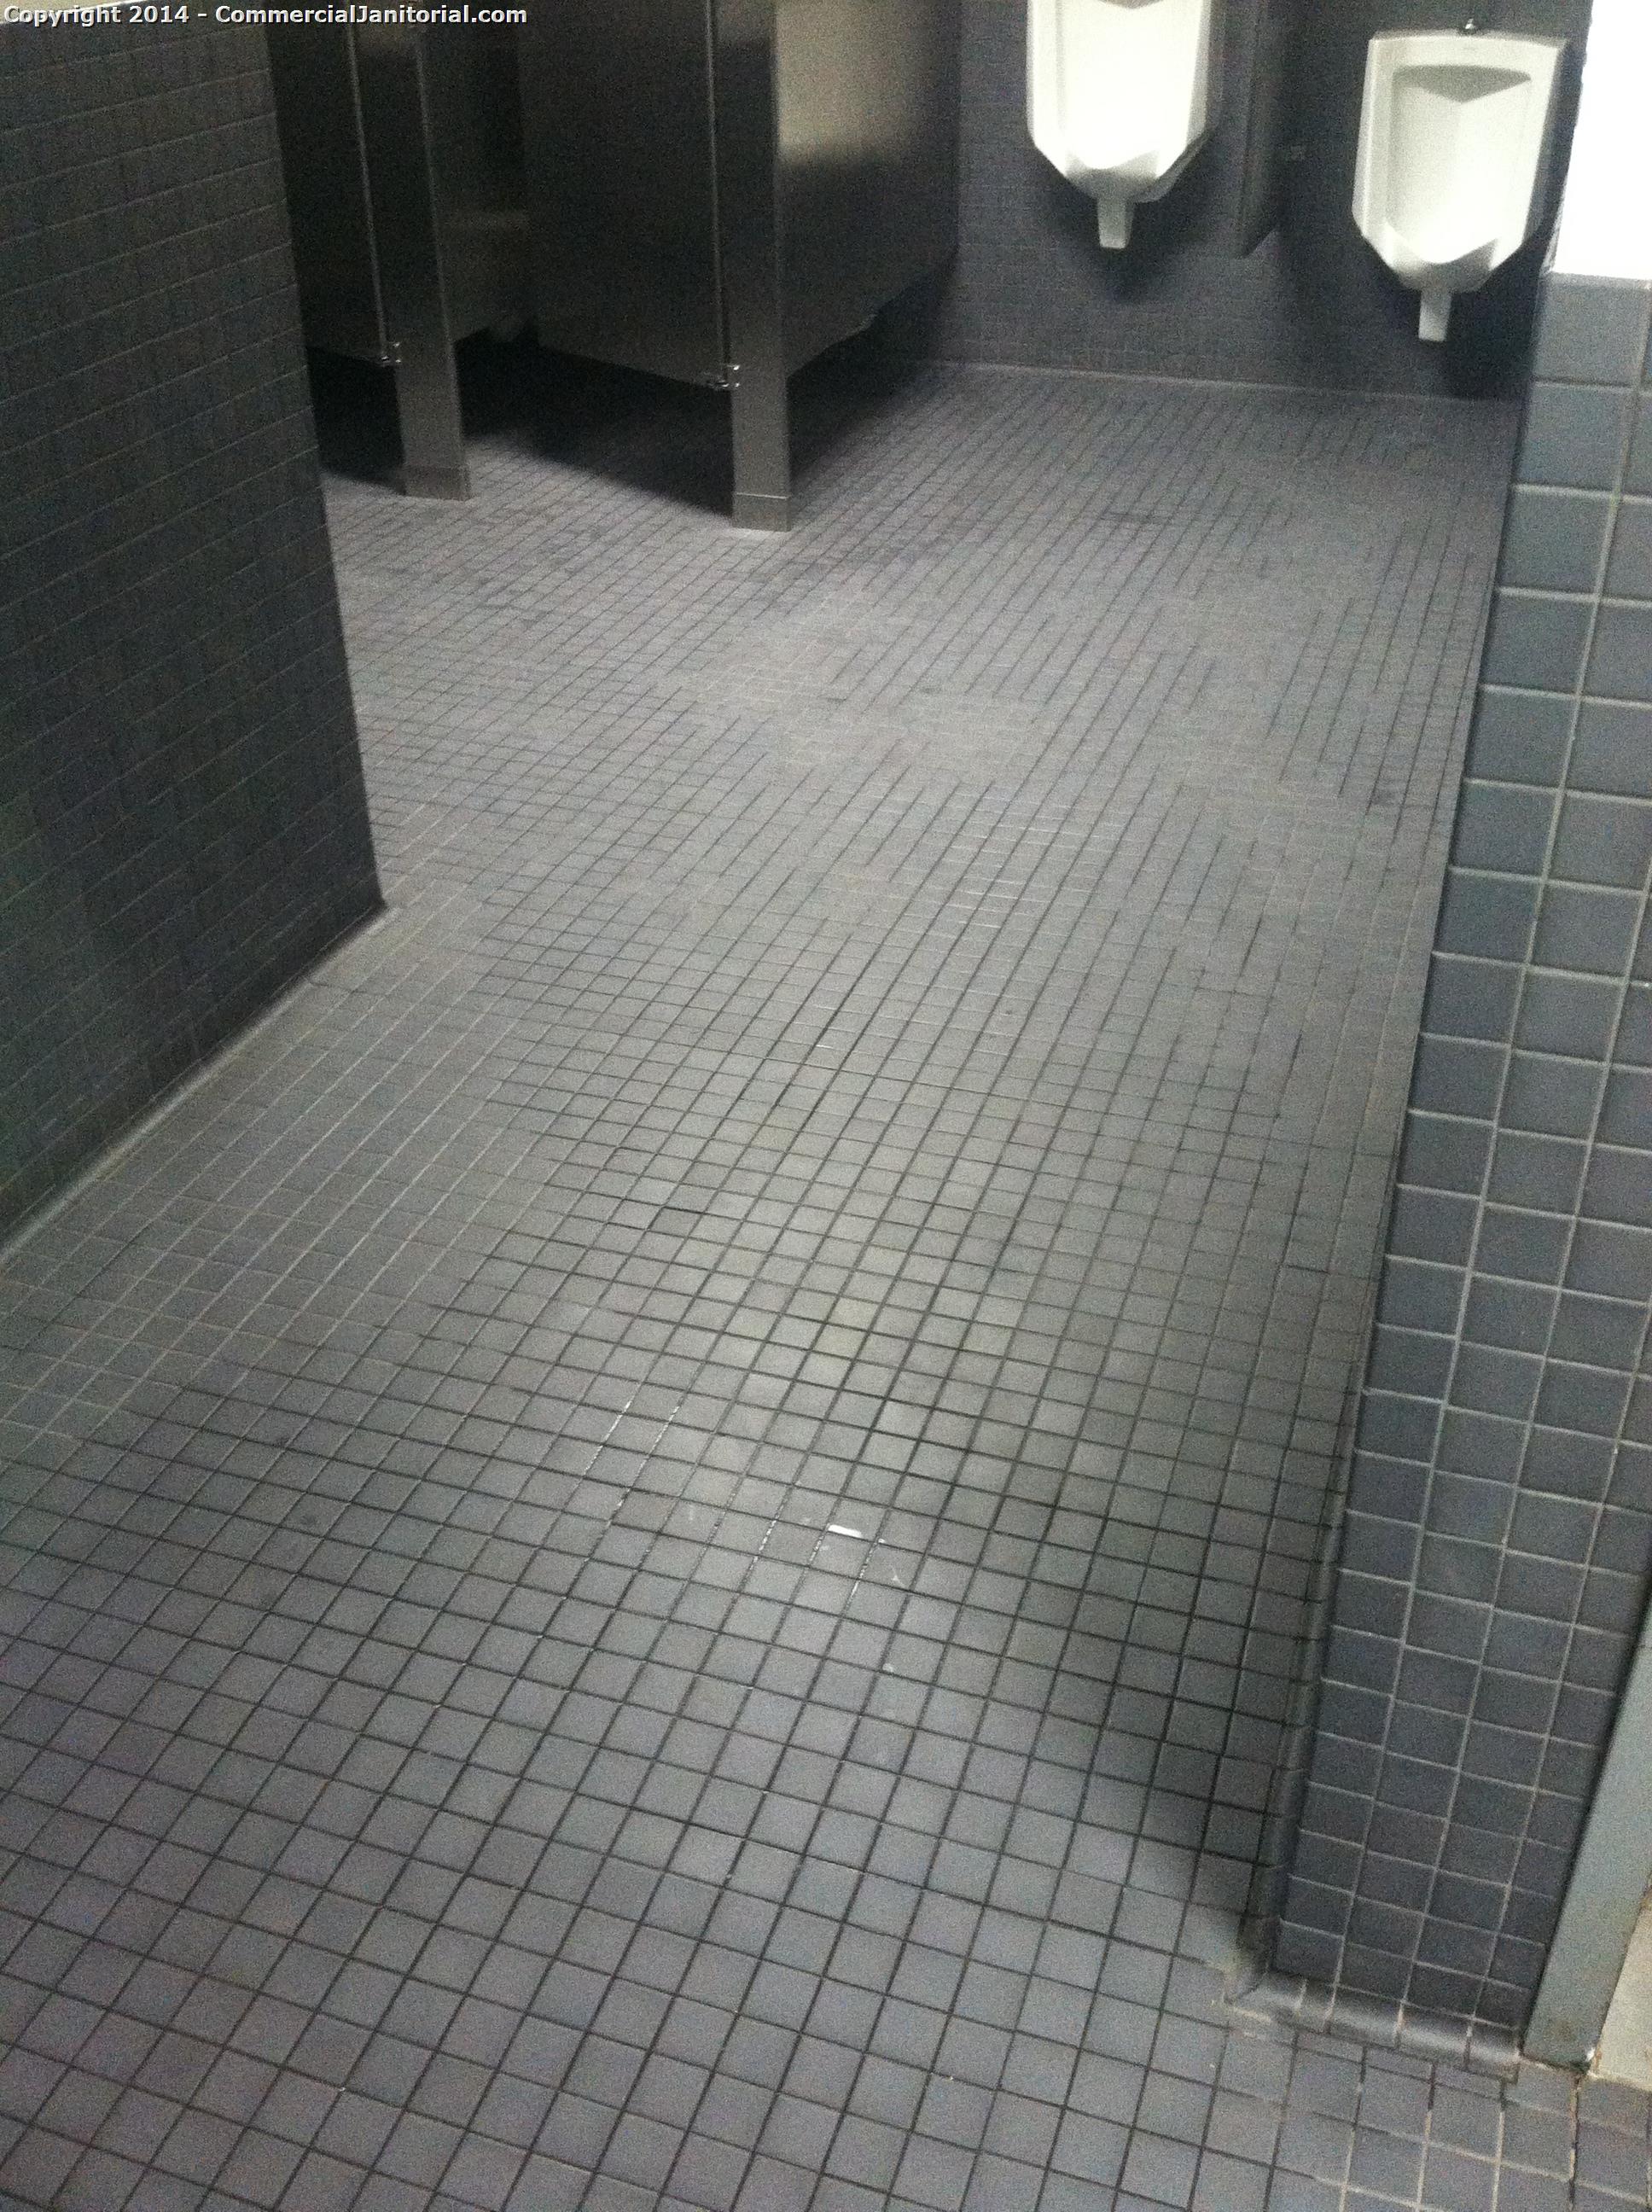 Scrubbed all restrooms 